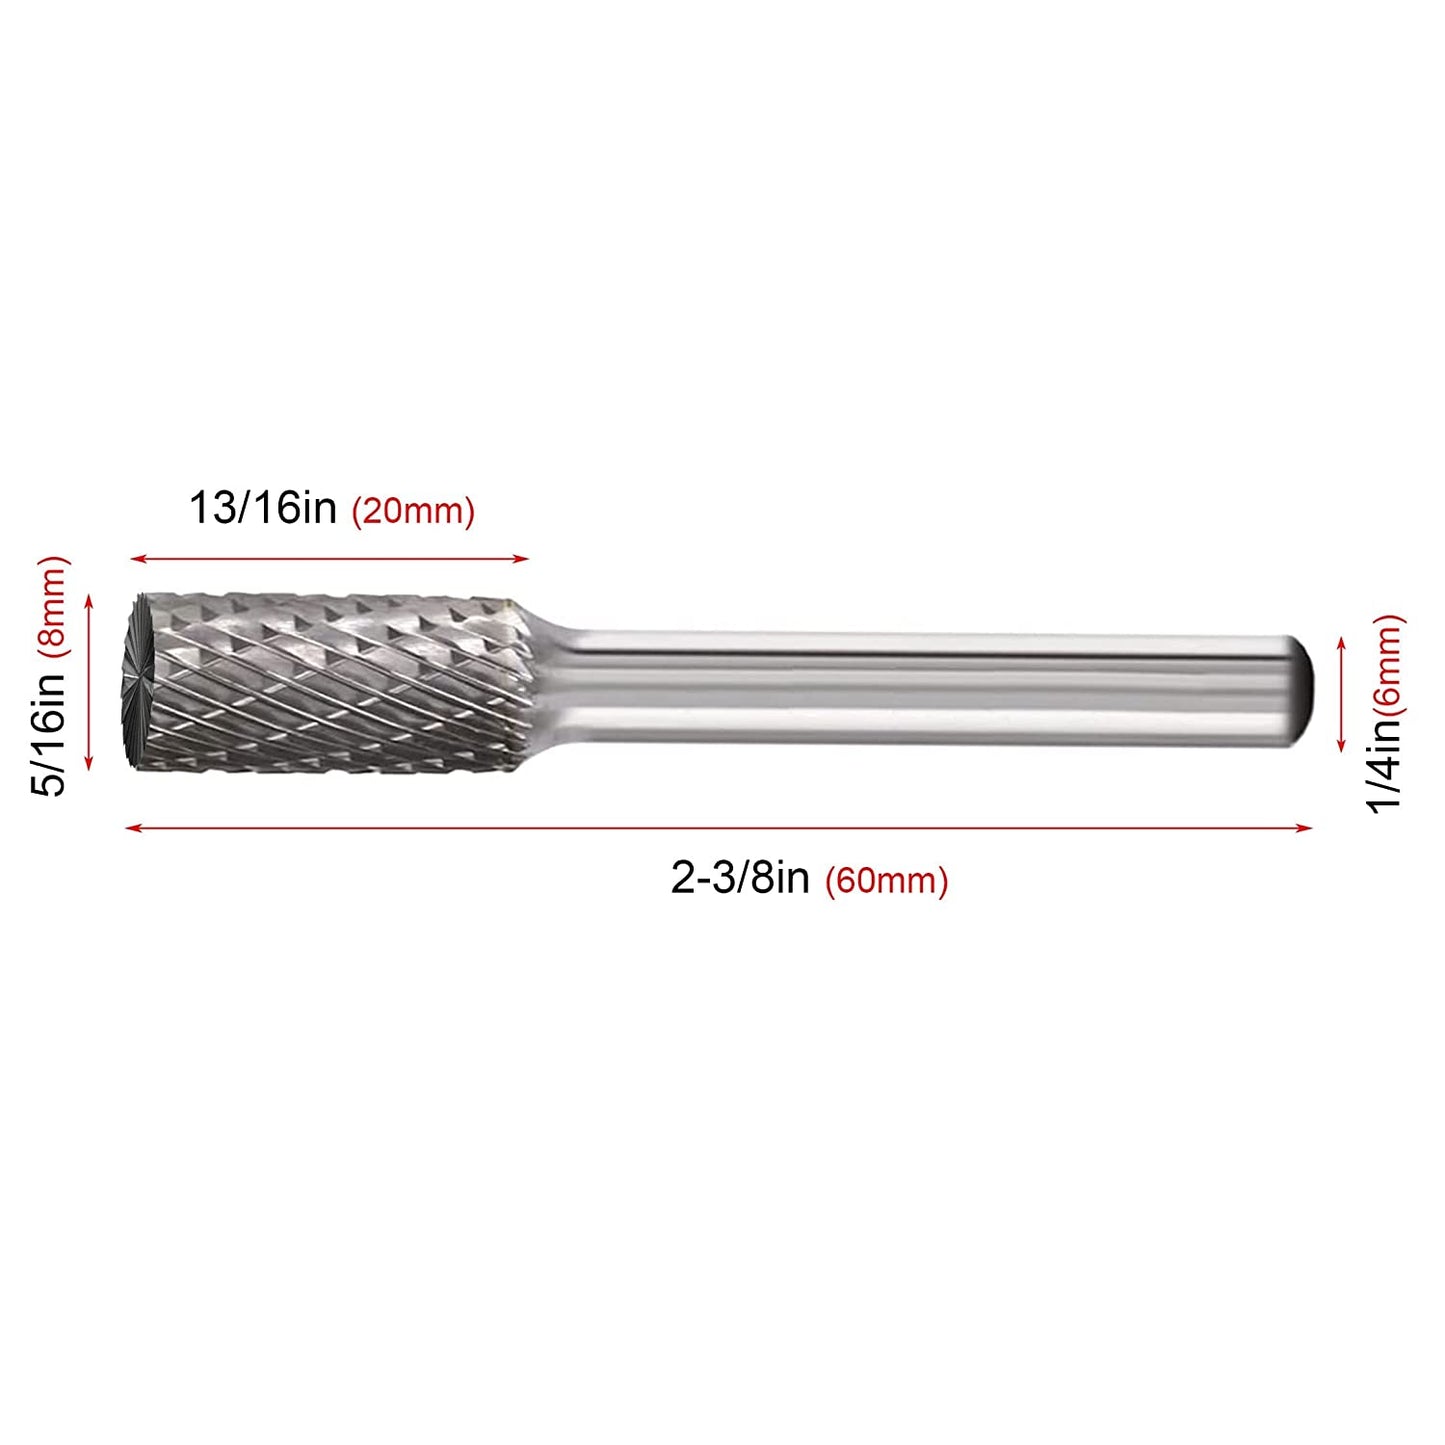 HAUTMEC Pro Cylinder Tungsten Rotary File Carbide Burr 1/4" Shank Double Cut for Die Grinder Bit Woodworking,Drilling, Metal Carving, Engraving, Polishing HT0197-MC